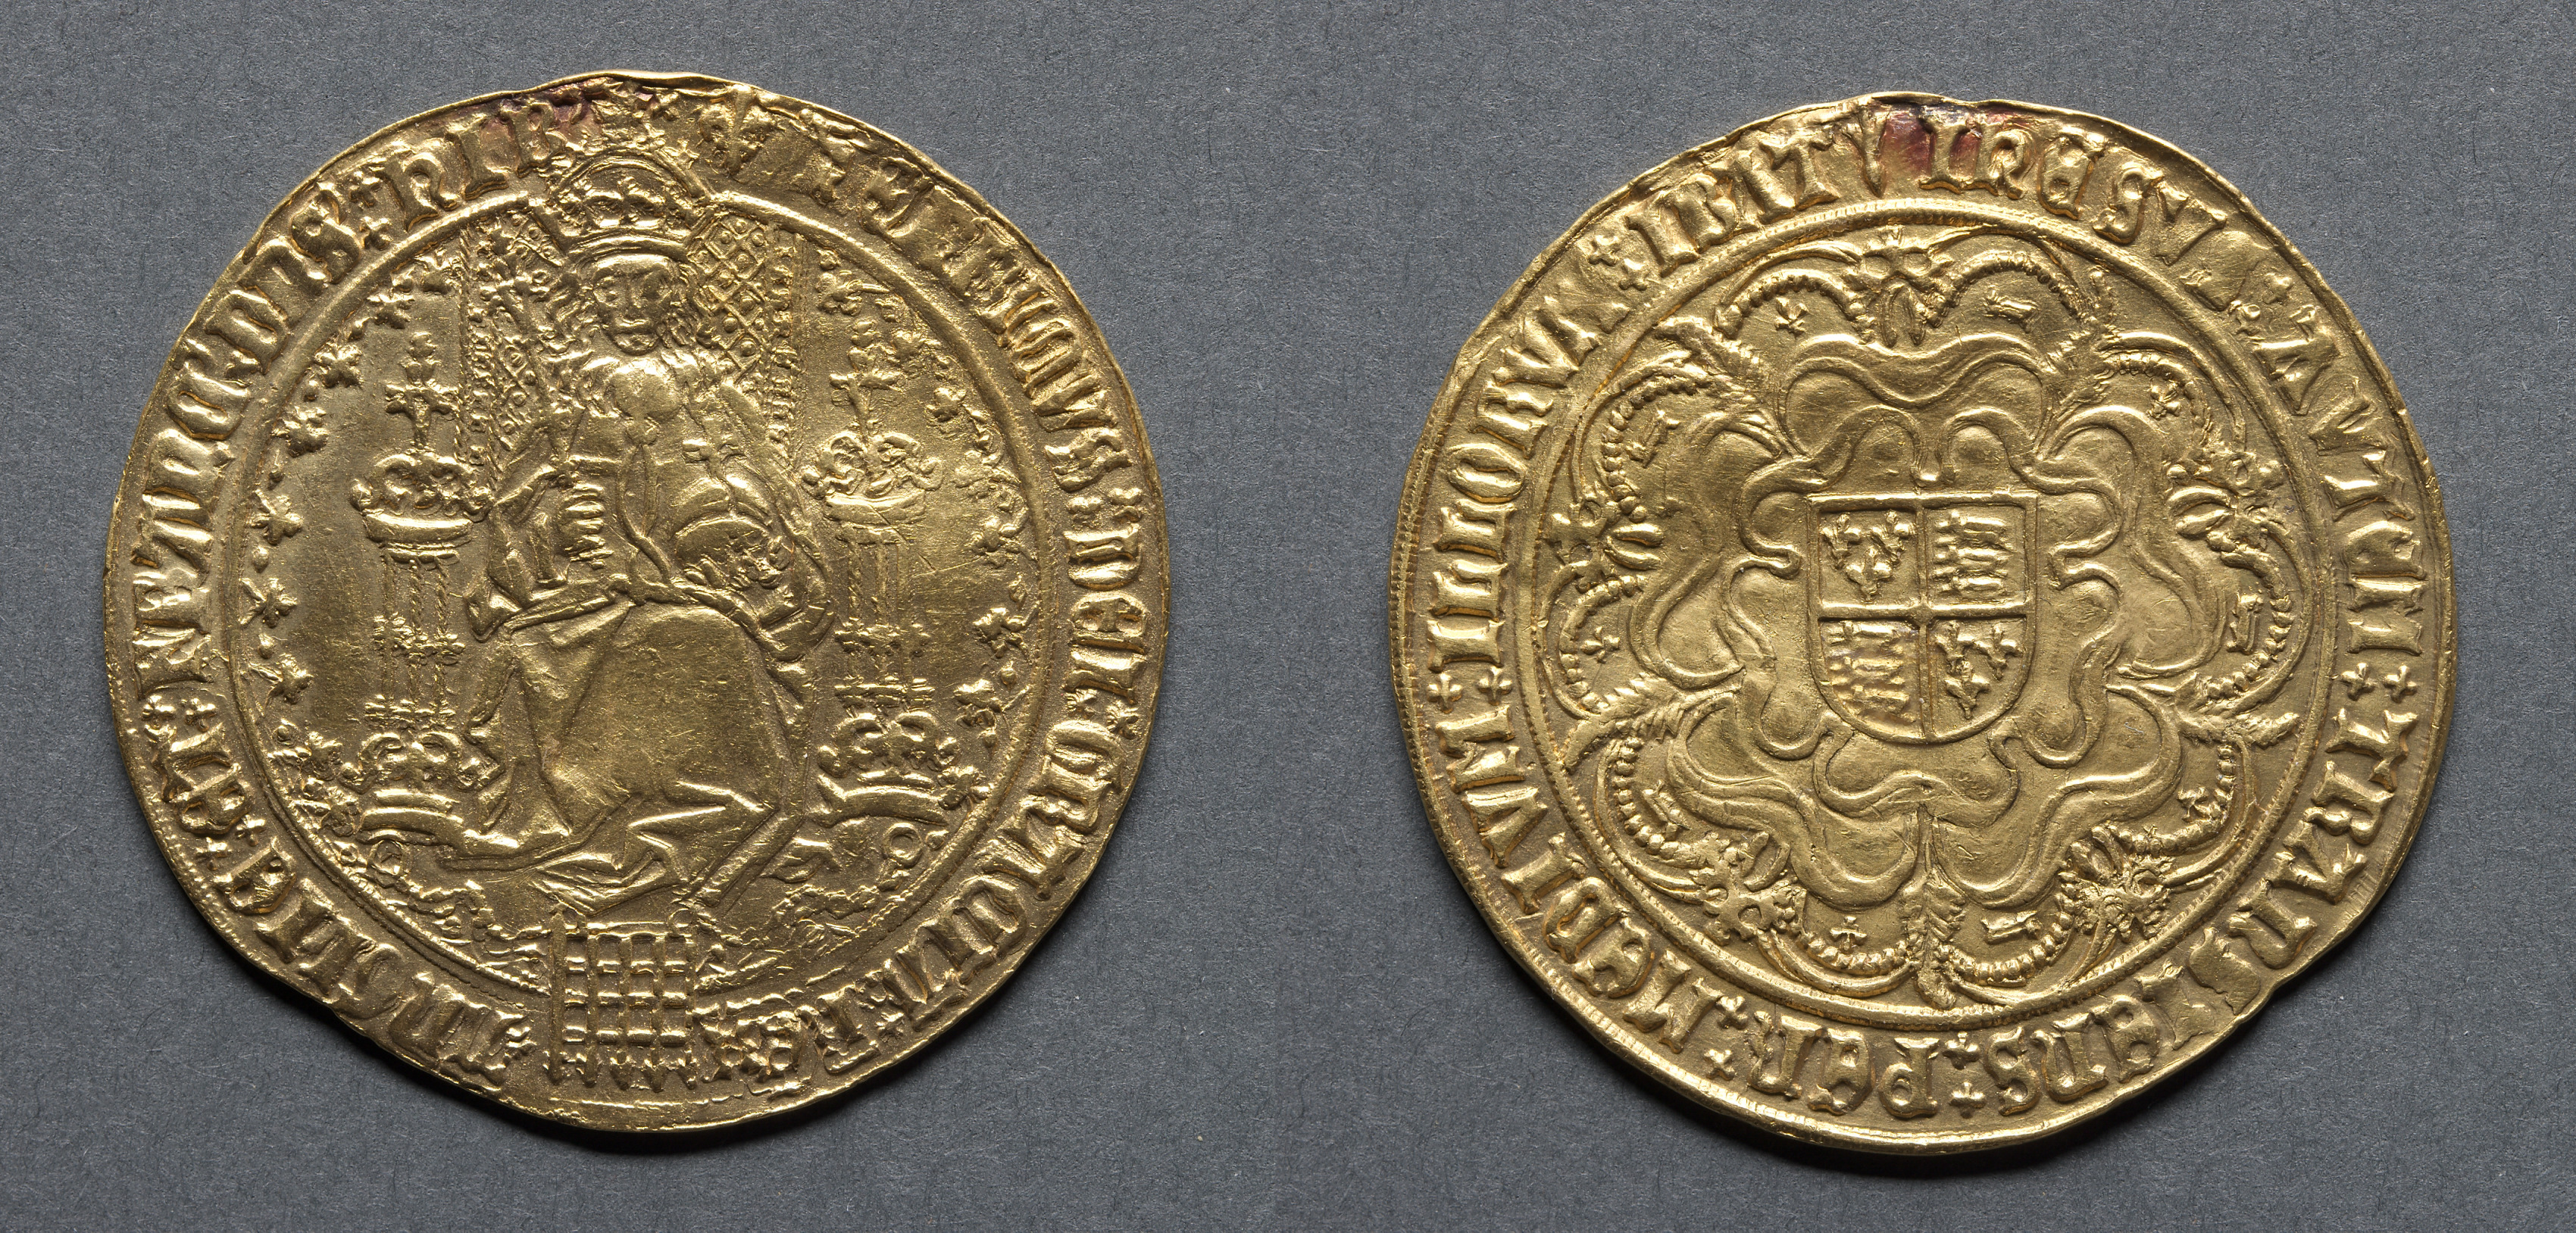 Sovereign: Henry VIII Enthroned (obverse); Royal Arms on Tudor Rose (reverse)